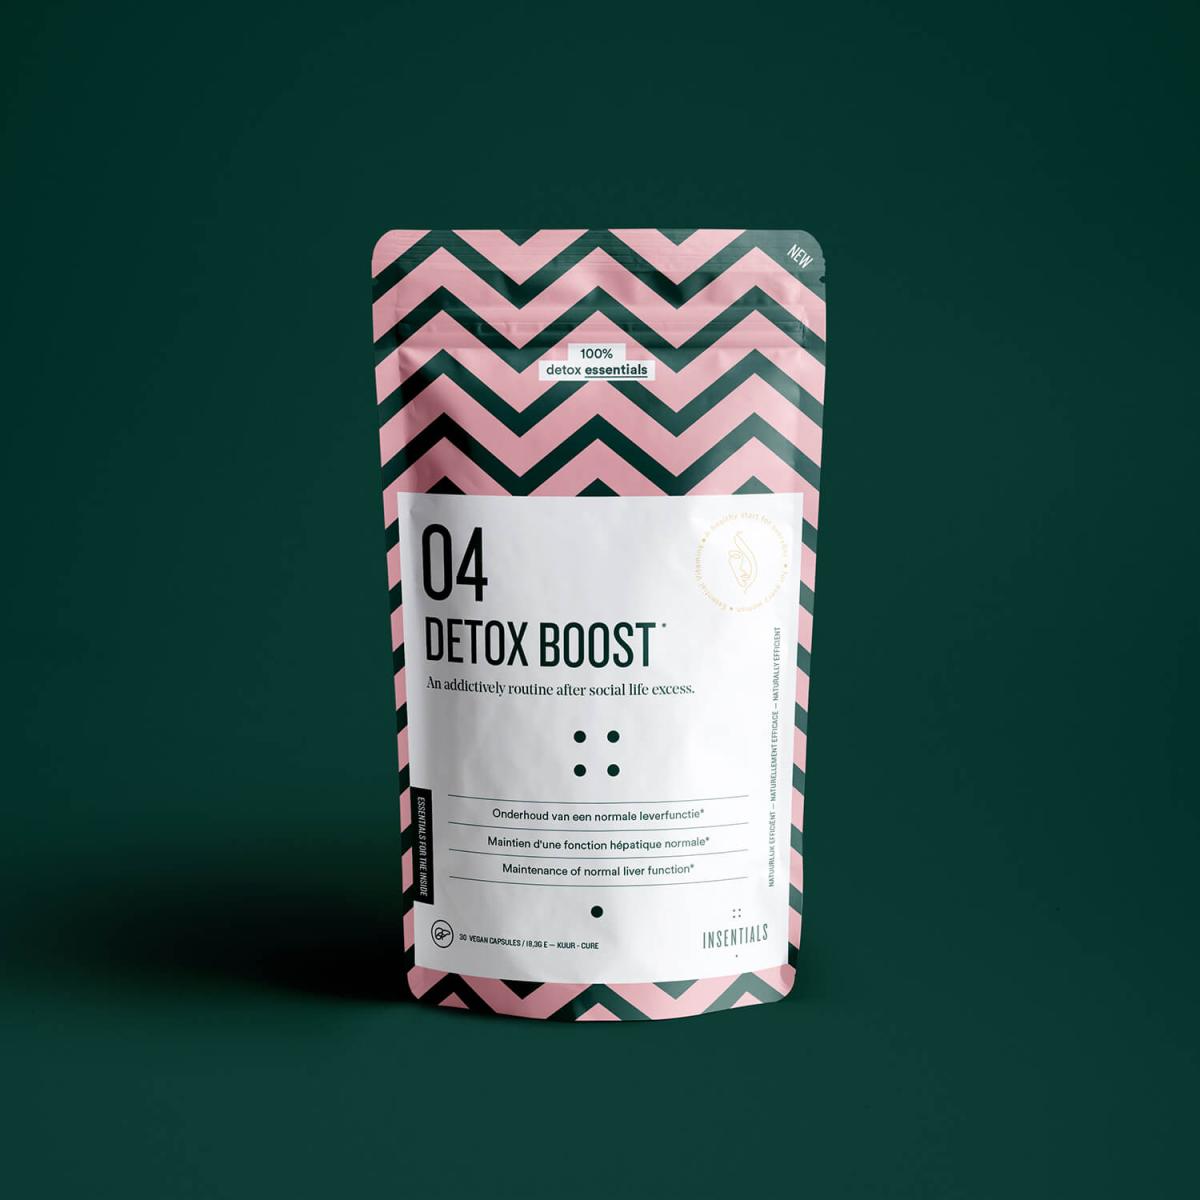 A pack of 04 Detox Boost